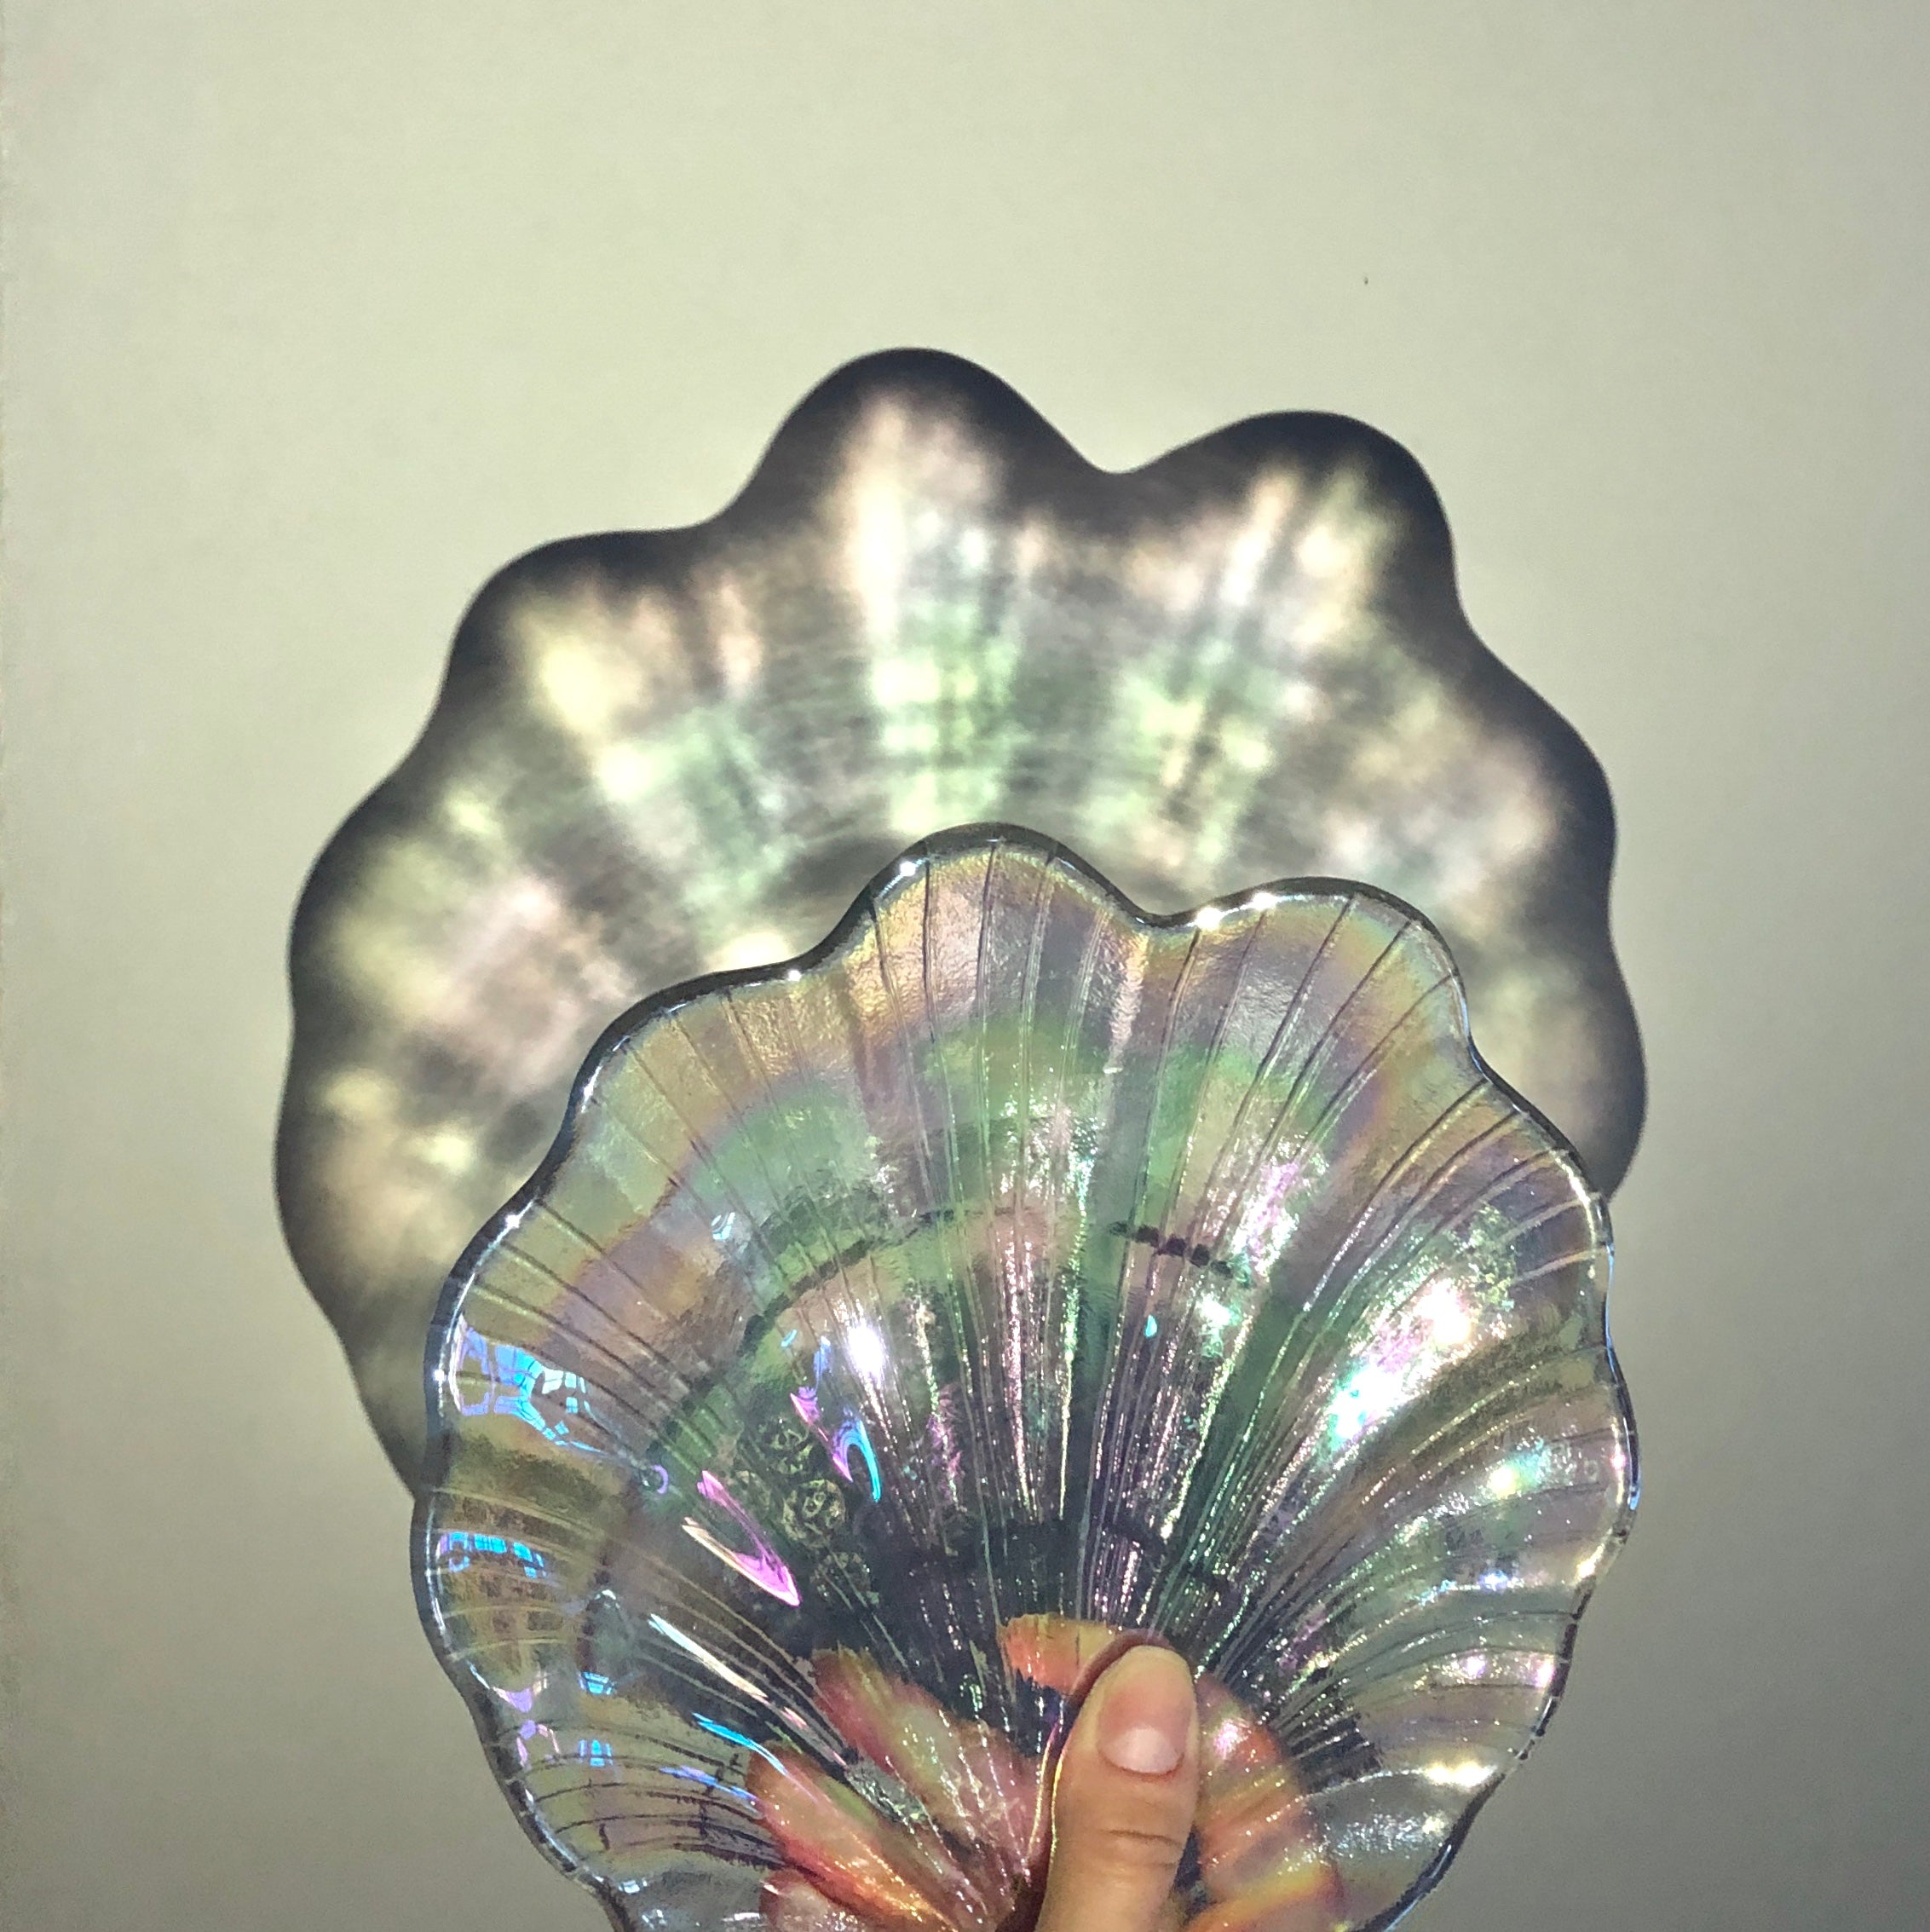 Holographic Shell Plates by PROSE Tabletop